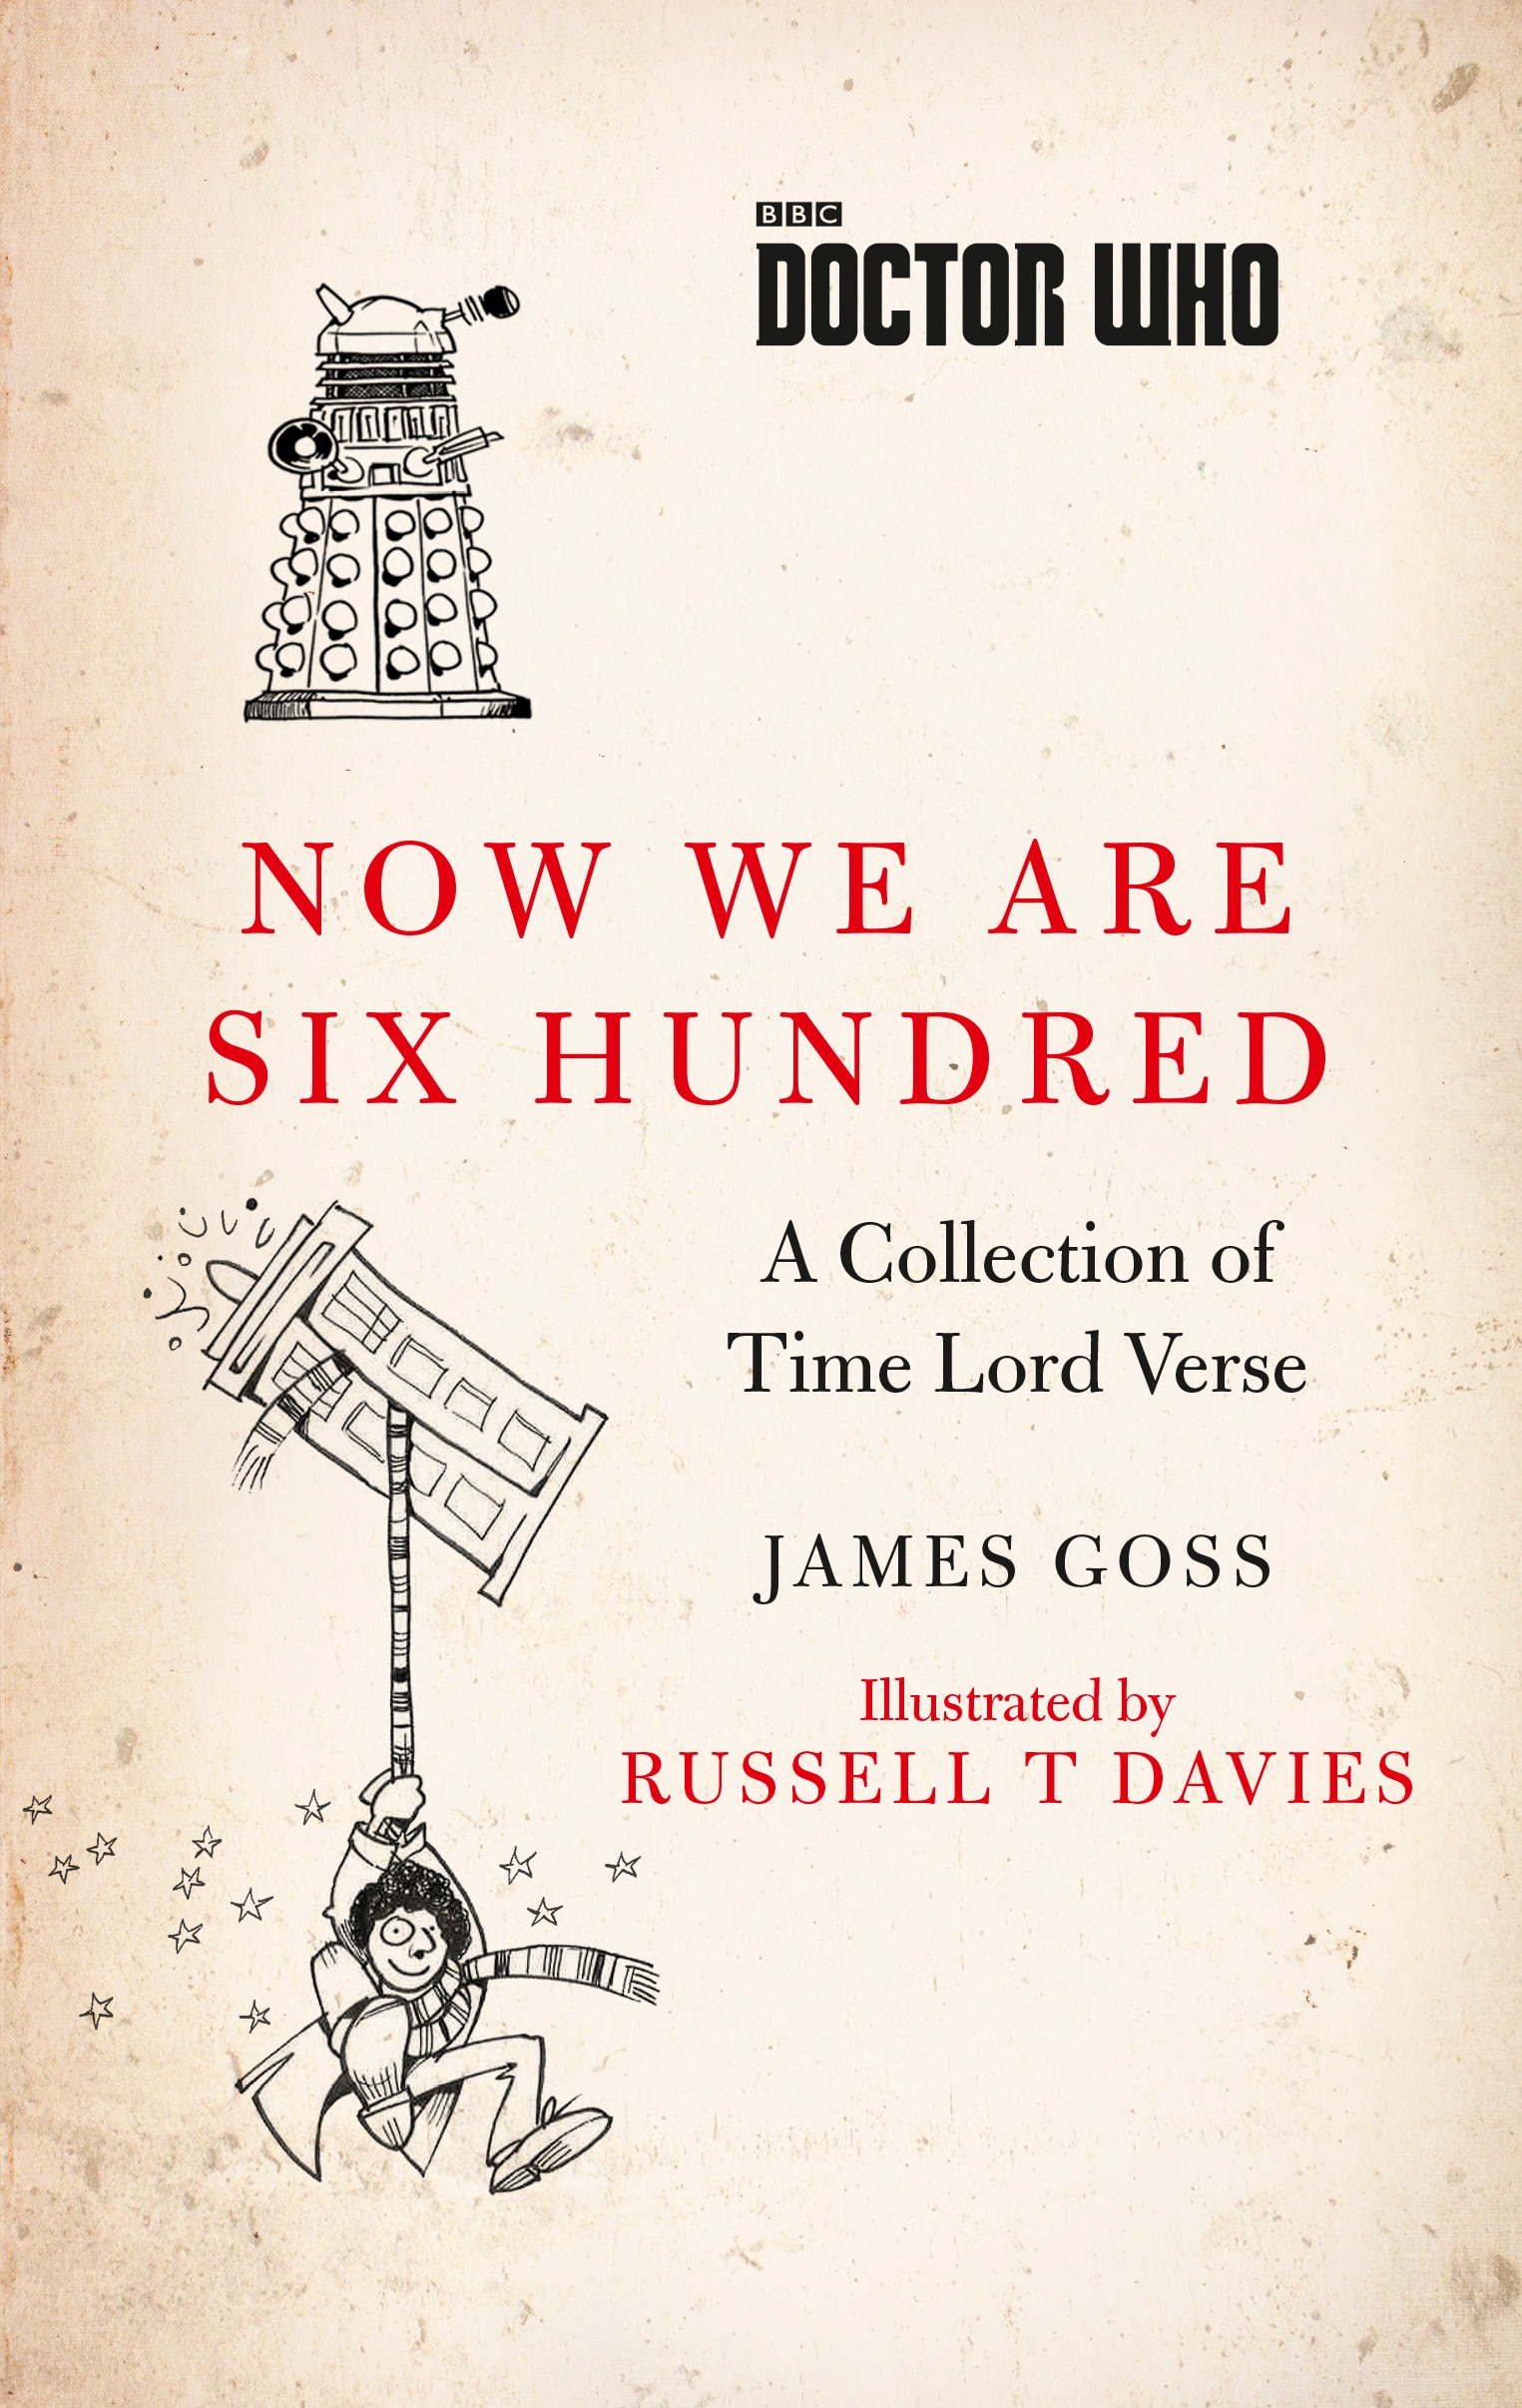 Former Showrunner Russell T Davies Returns To Doctor Who For Poetry Book Doctor Who 3551